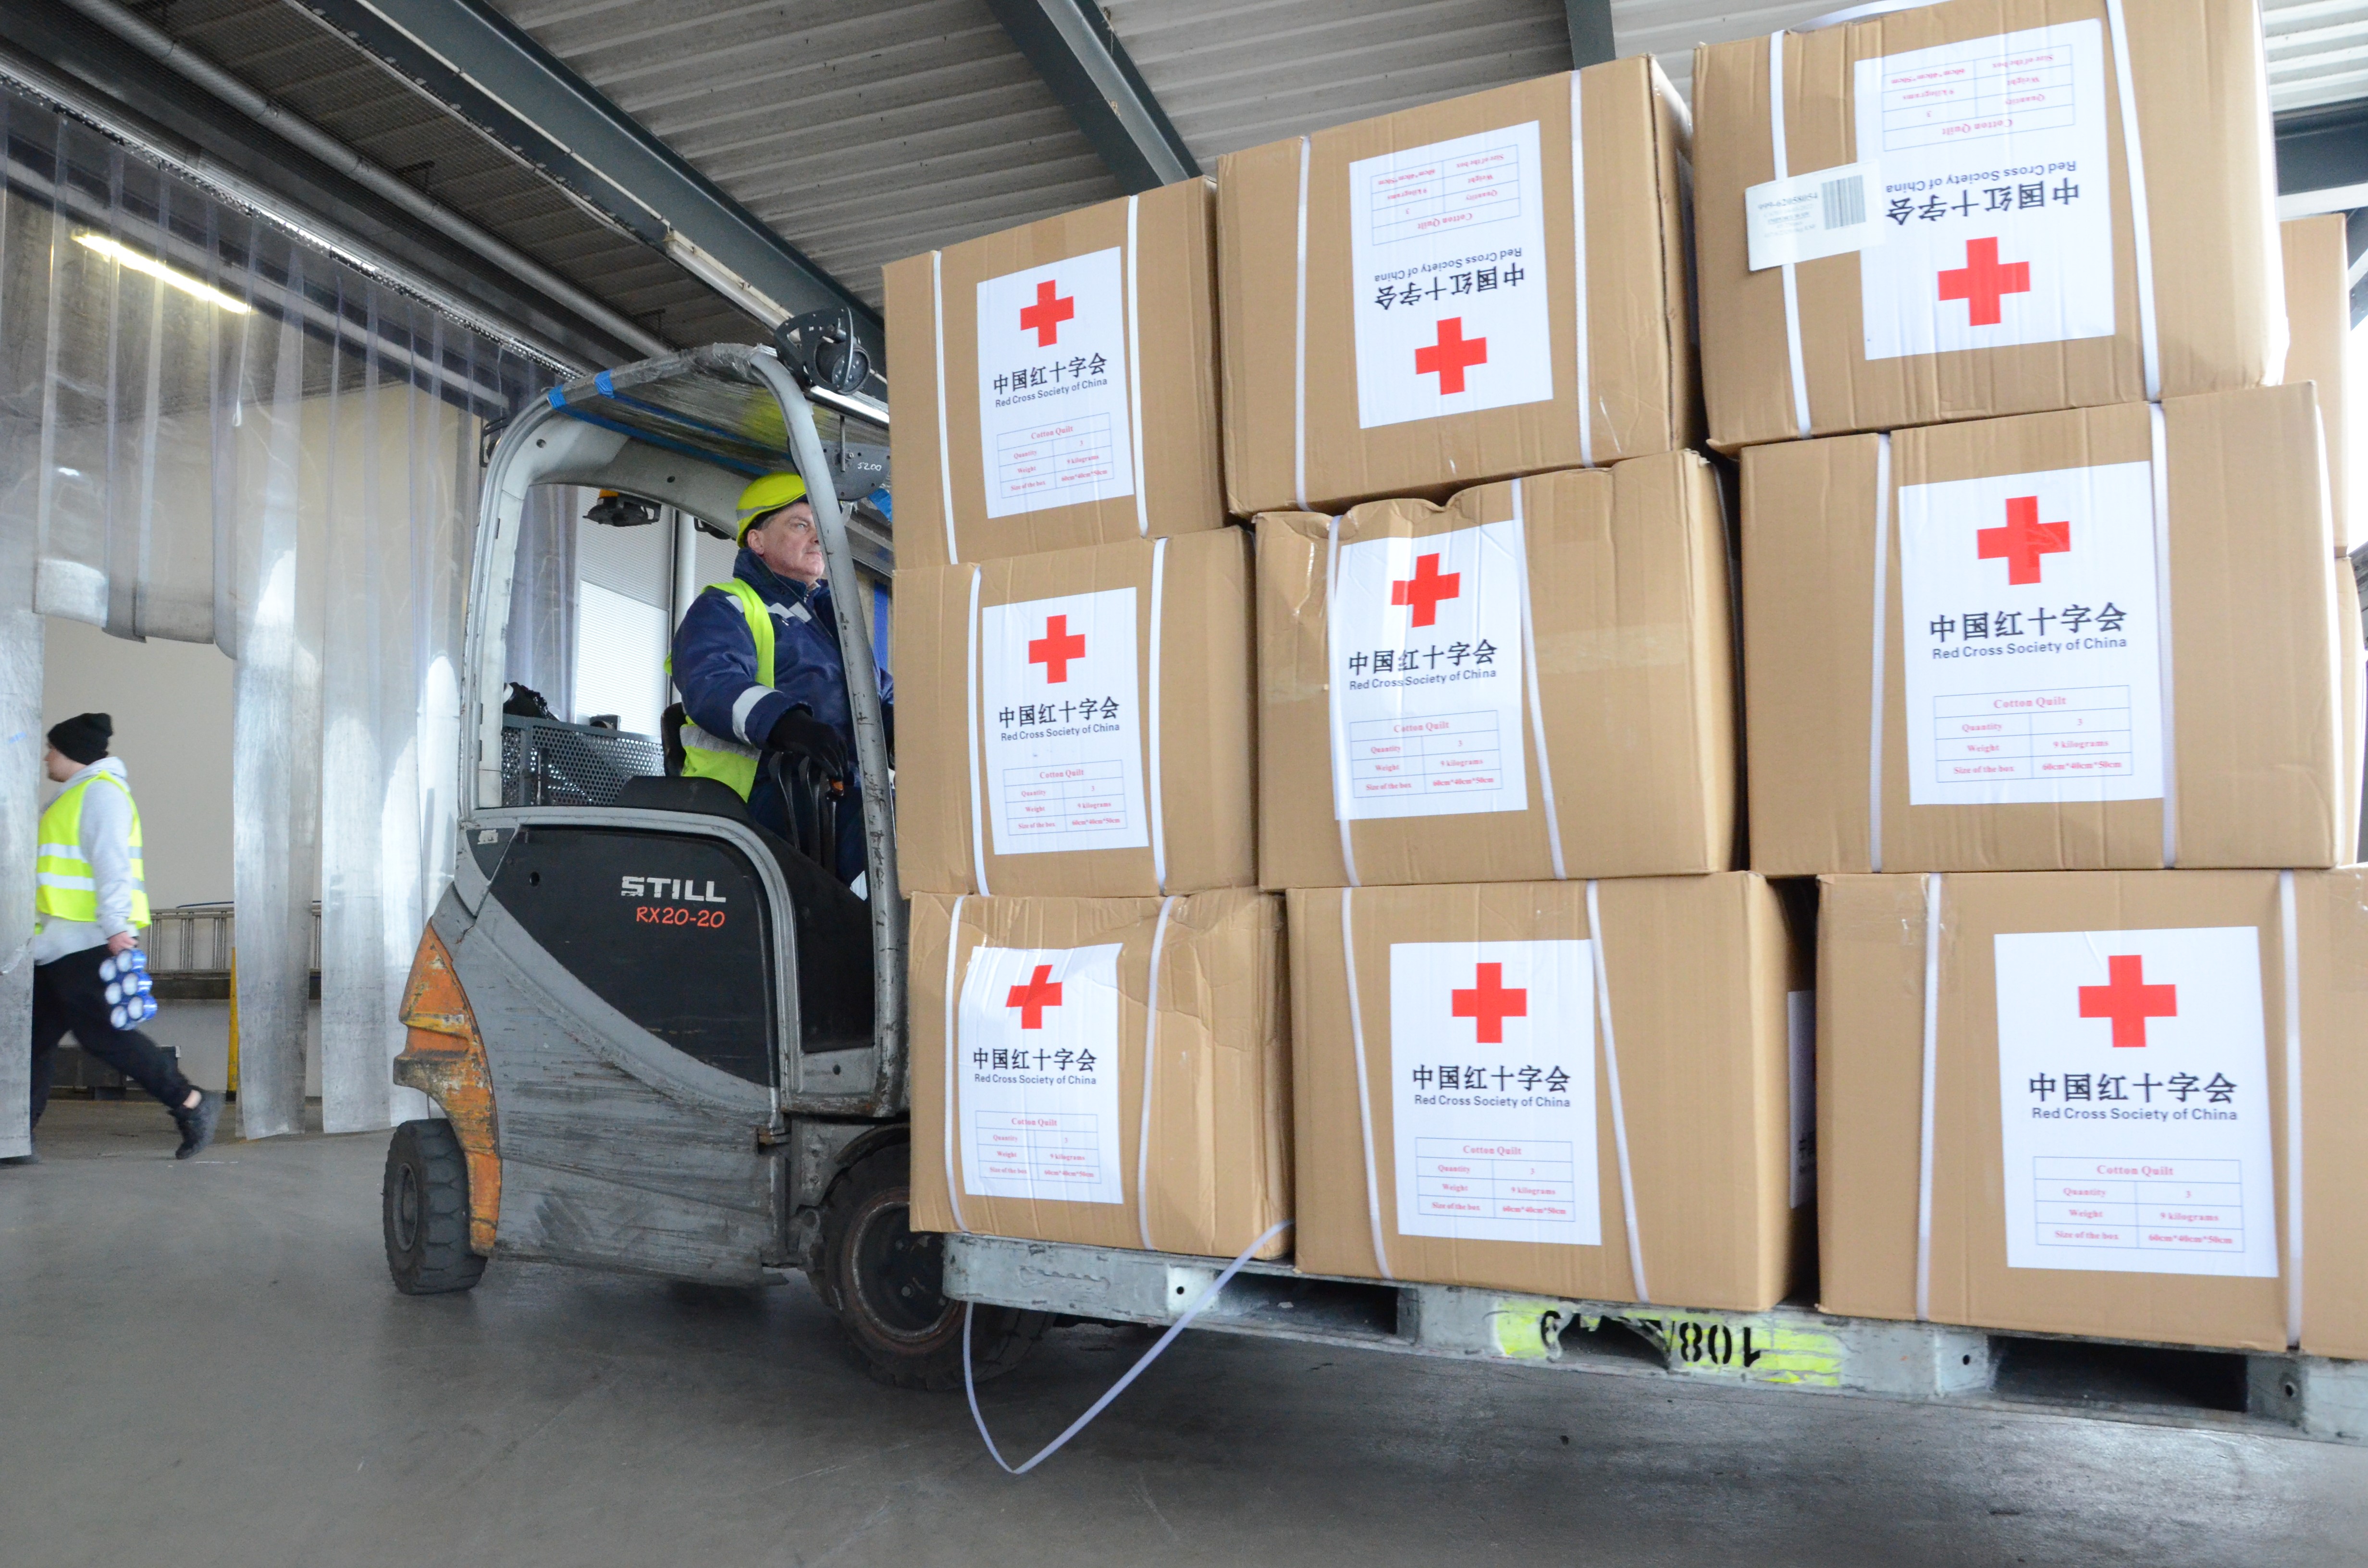 Humanitarian aid supplies sent by the Red Cross Society of China to the Ukrainian Red Cross Society are transported in Warsaw, Poland, on March 15.